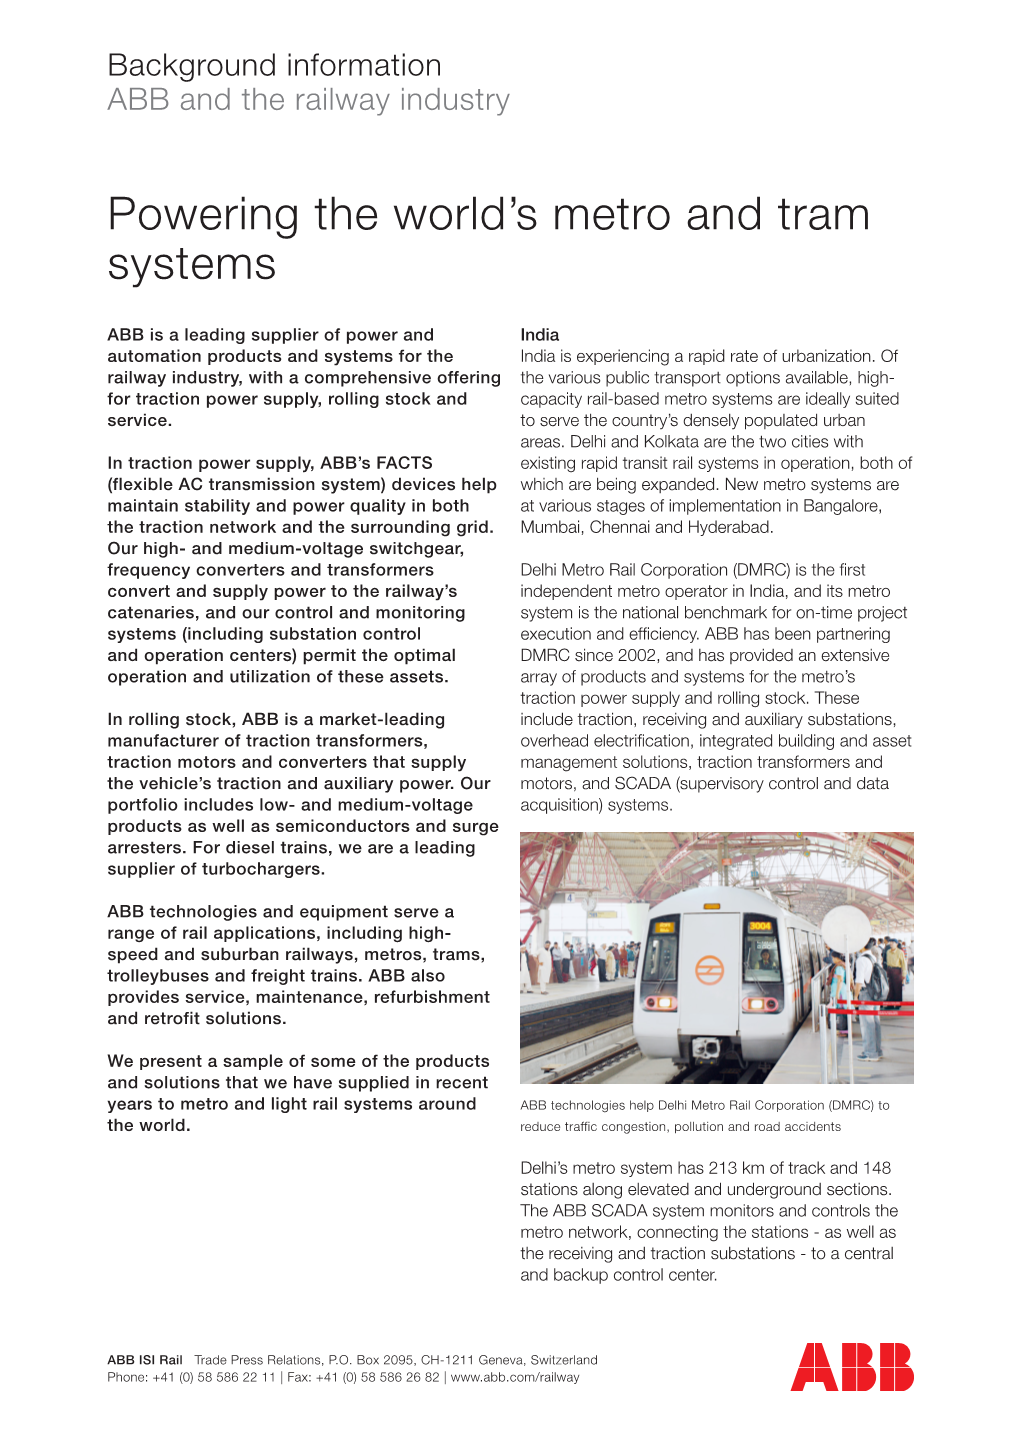 Powering the World's Metro and Tram Systems